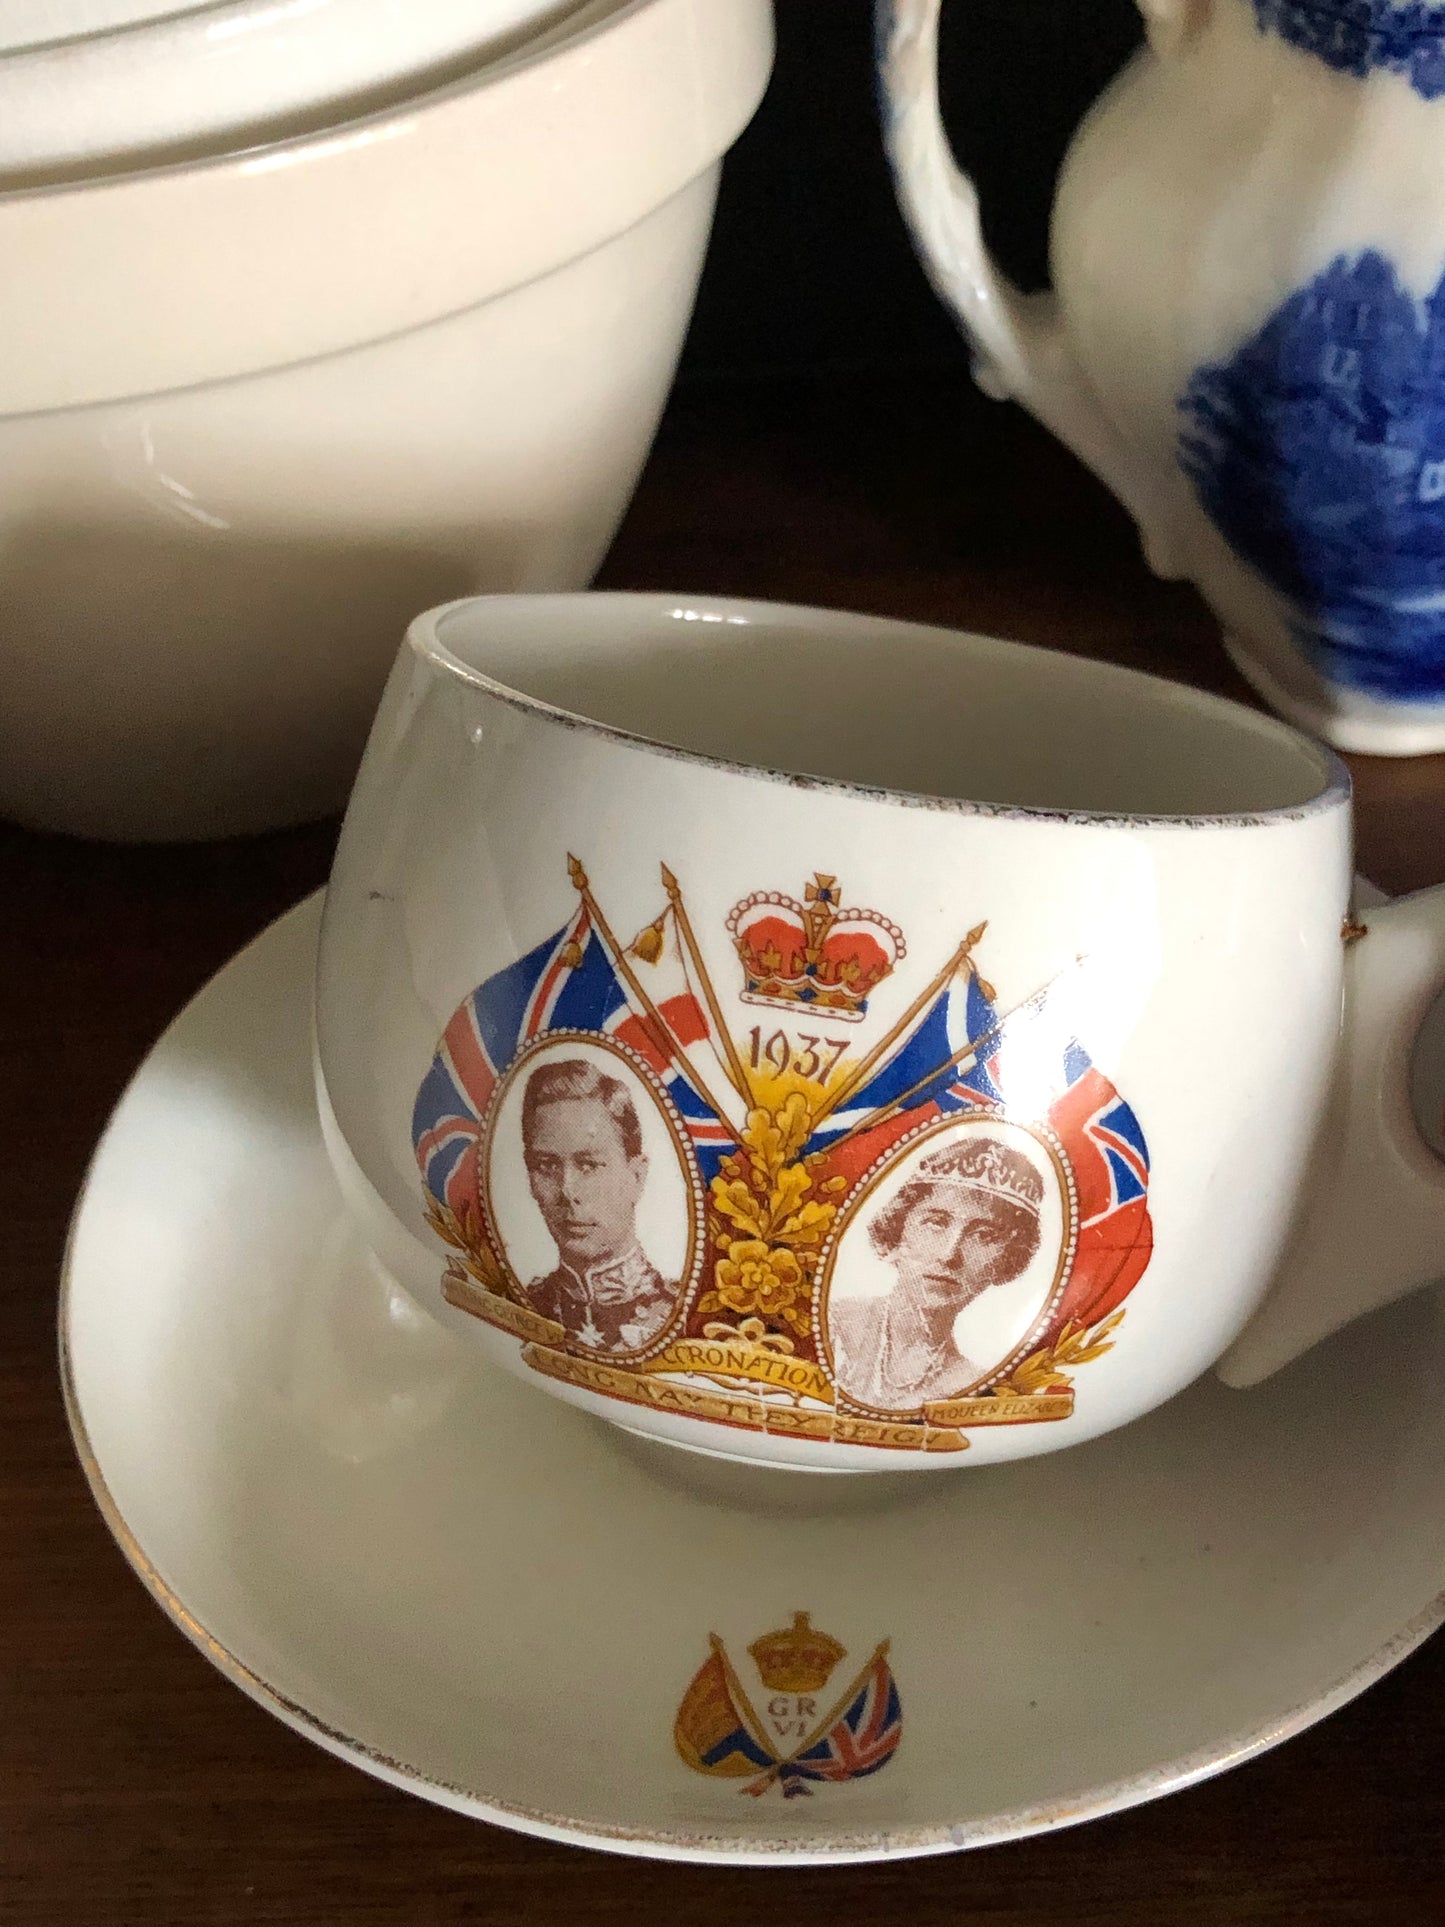 vintage Royal Coronation 1937 commemorative cup and saucer Hotel Ware by Alfred Meakin